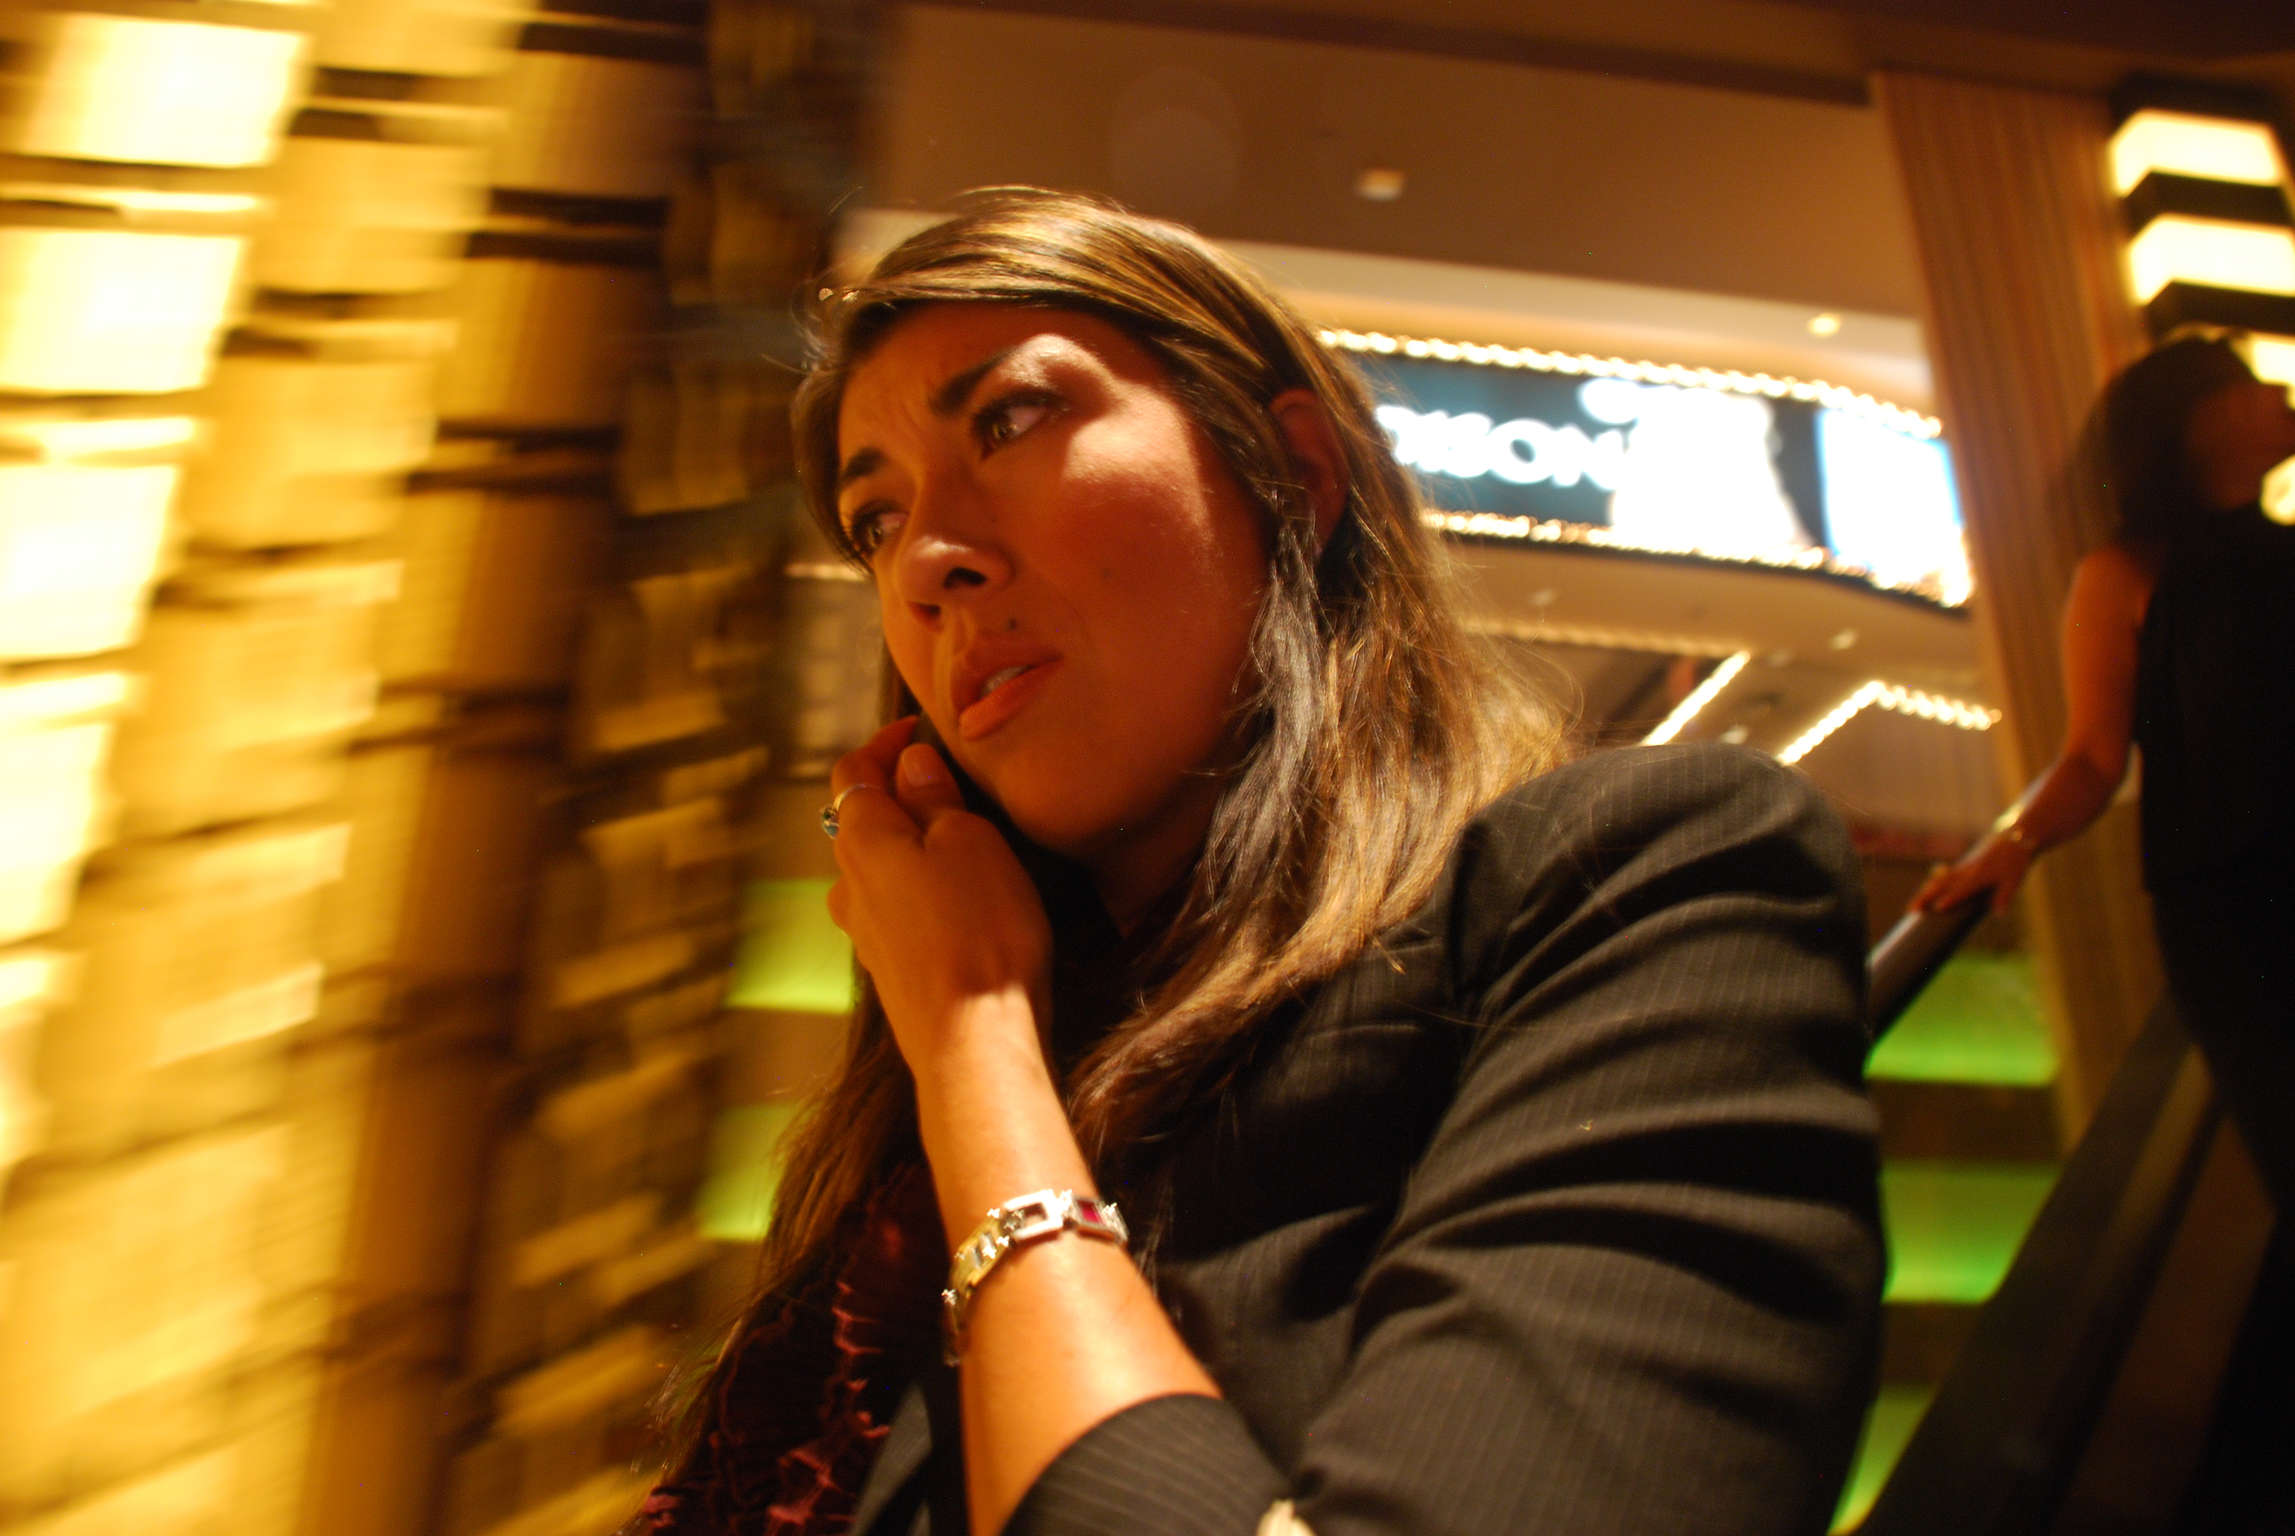 FILE: AUGUST 2, 2012: Lucy Flores talks to her dad on the phone after a long day of campaign and political events, including a reception at Planet Hollywood.(Photo by Michael Laris/The Washington Post via Getty Images)